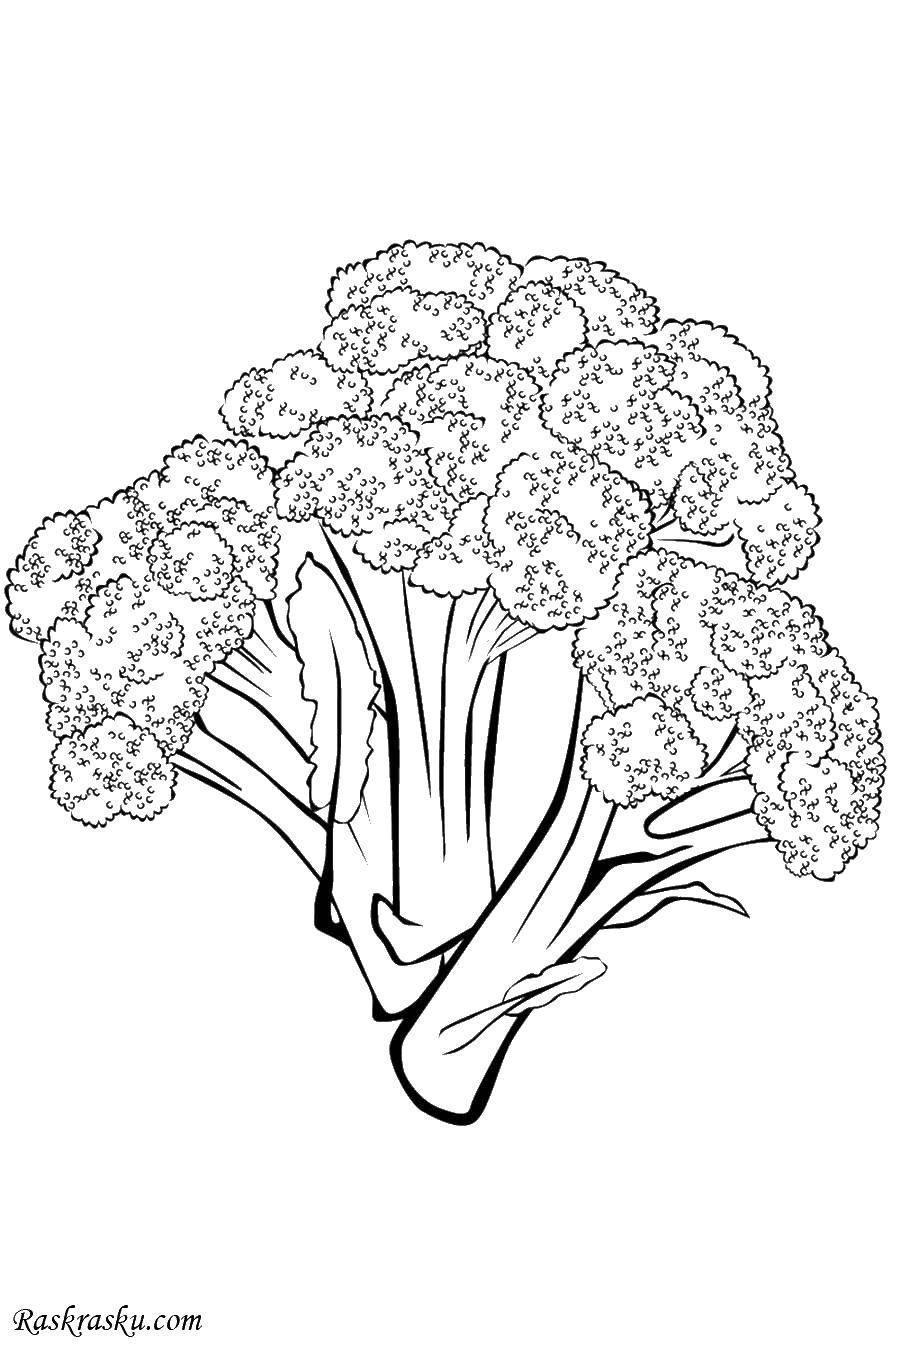 Coloring Cauliflower. Category vegetables. Tags:  Vegetables.